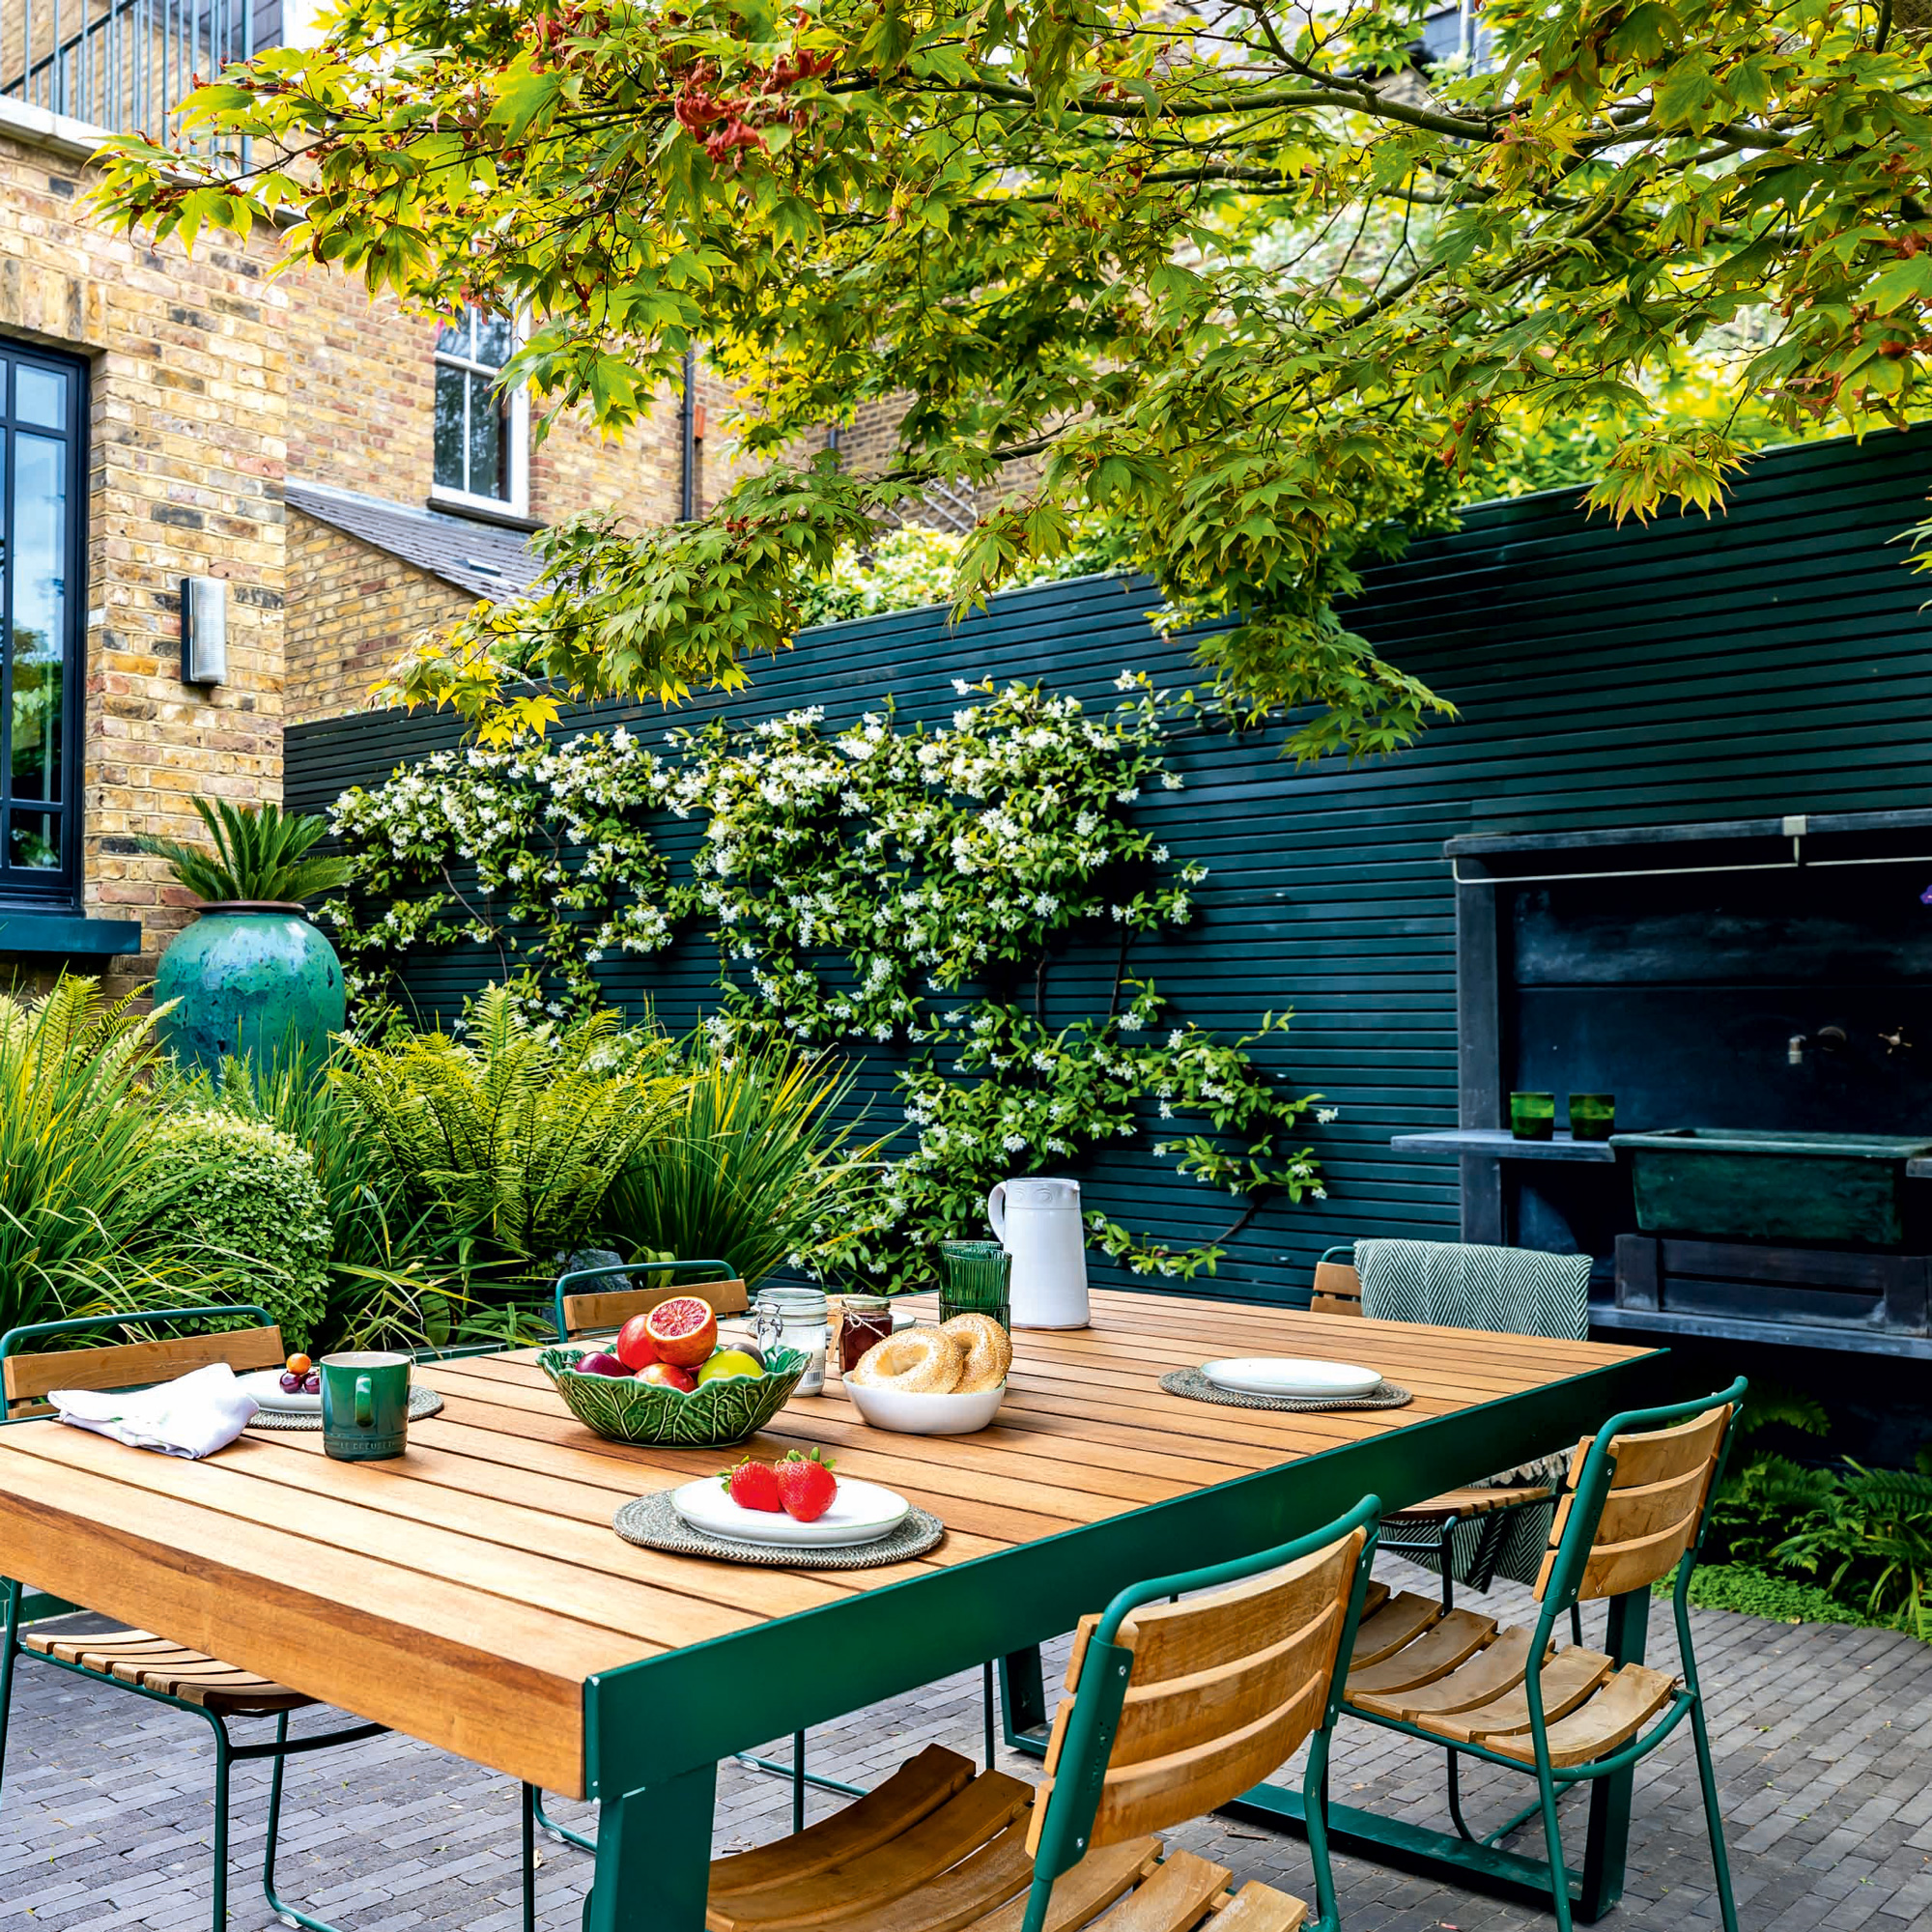 garden makeover with a dining table and chairs, outdoor kitchen and kitchen sink